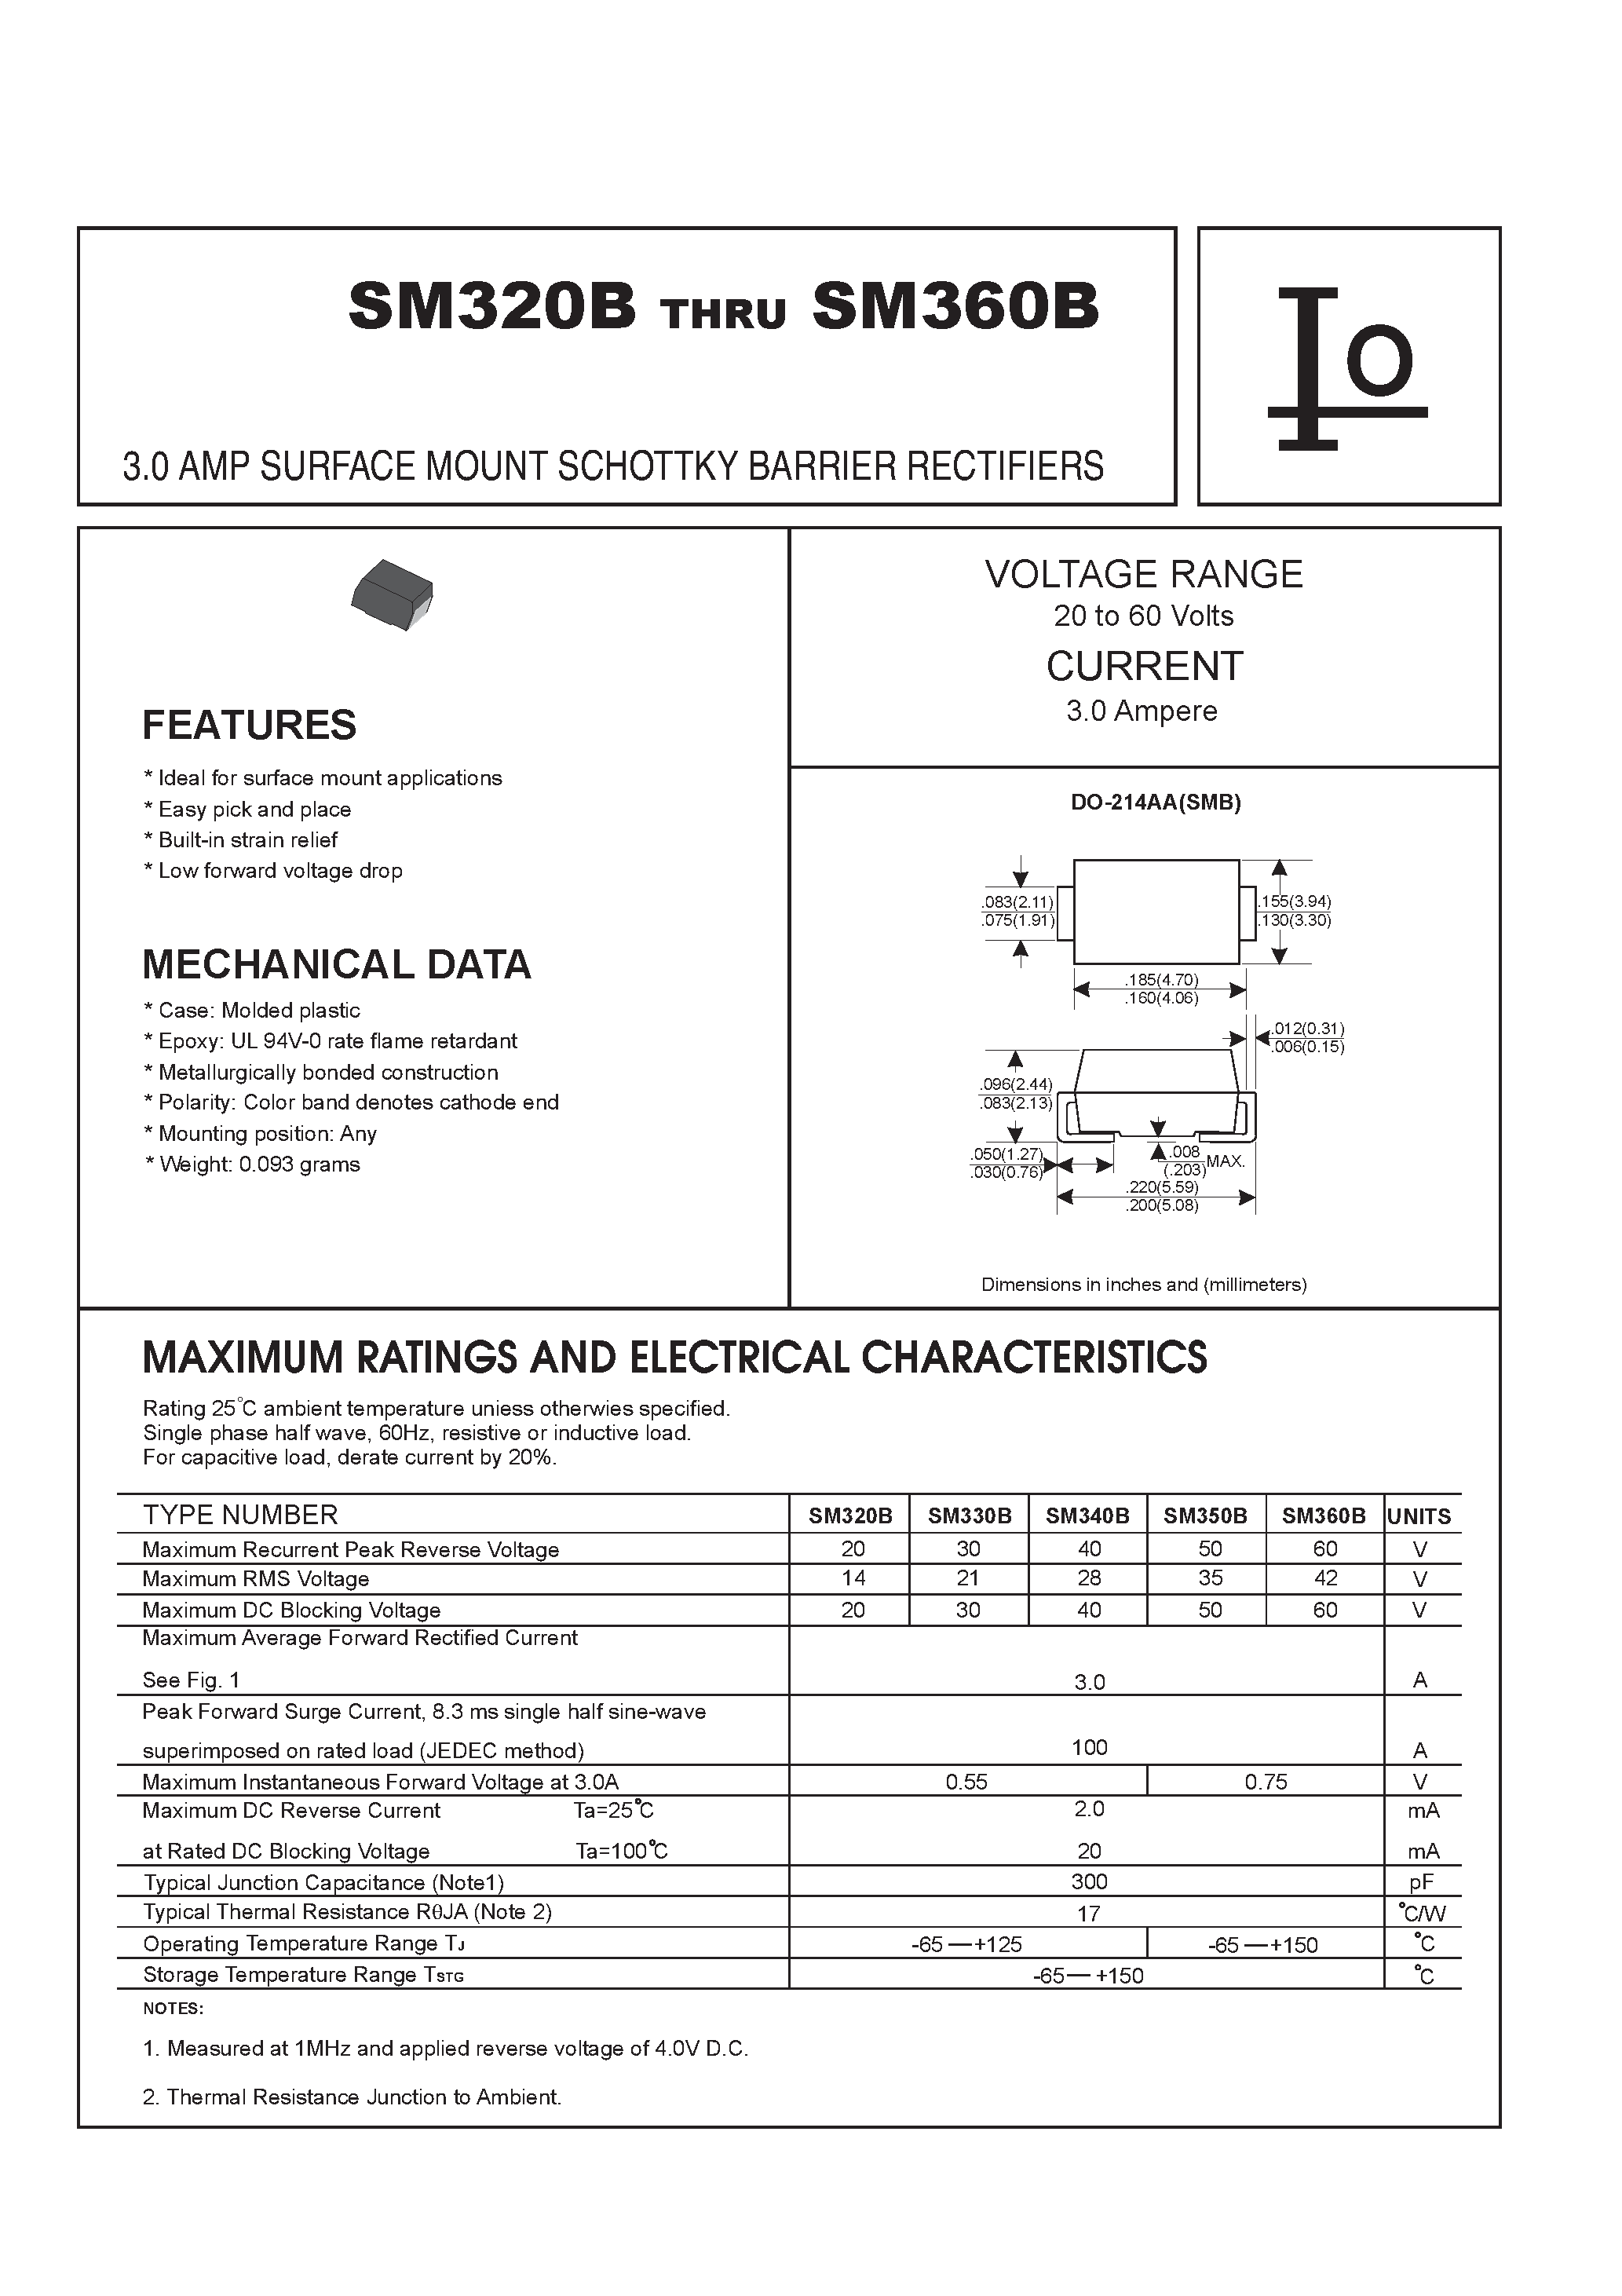 Datasheet SM350B - 3.0 AMP SURFACE MOUNT SCHOTTKY BARRIER RECTIFIERS page 1